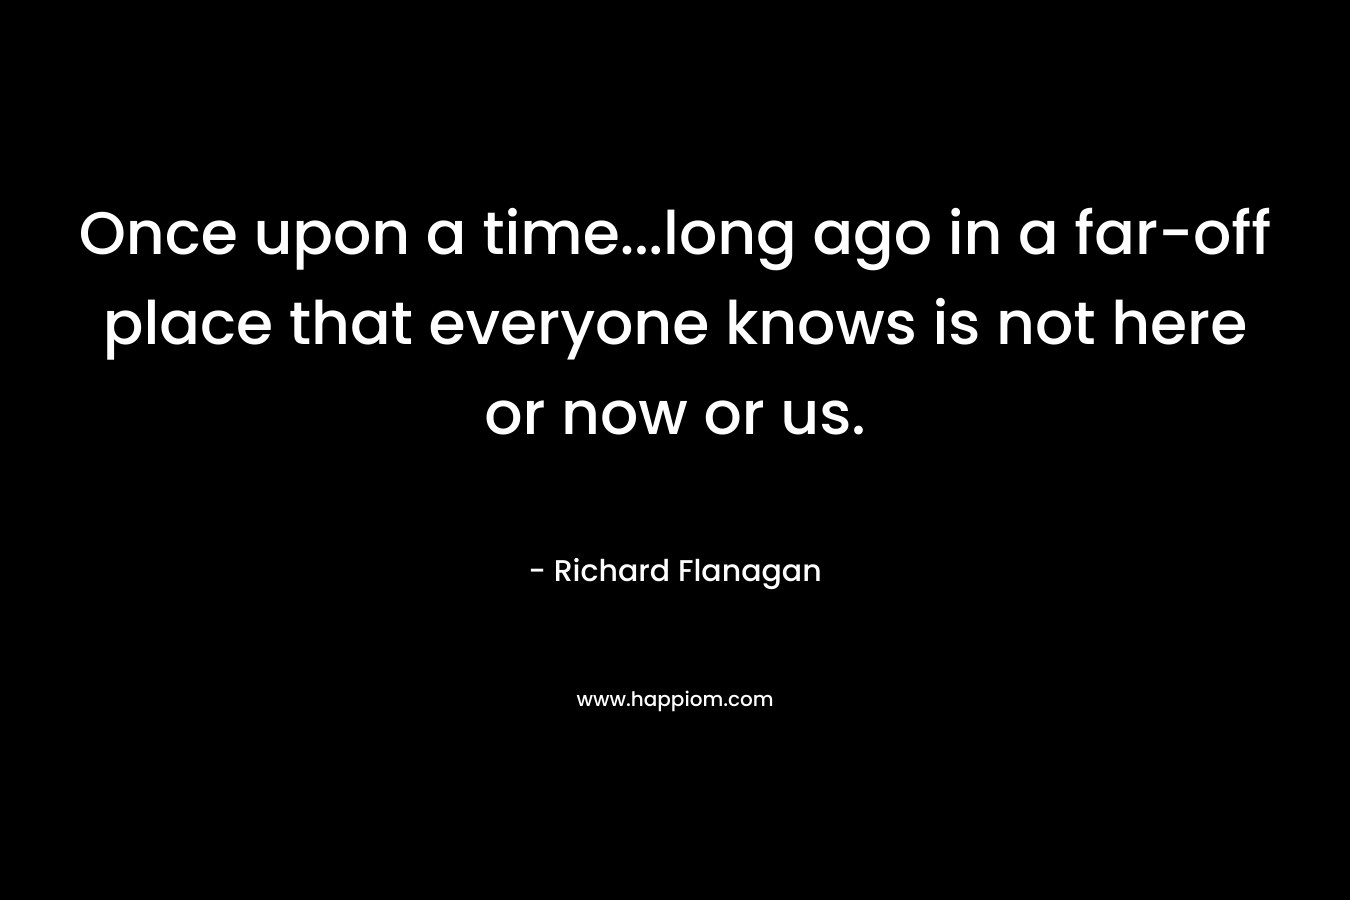 Once upon a time…long ago in a far-off place that everyone knows is not here or now or us. – Richard Flanagan